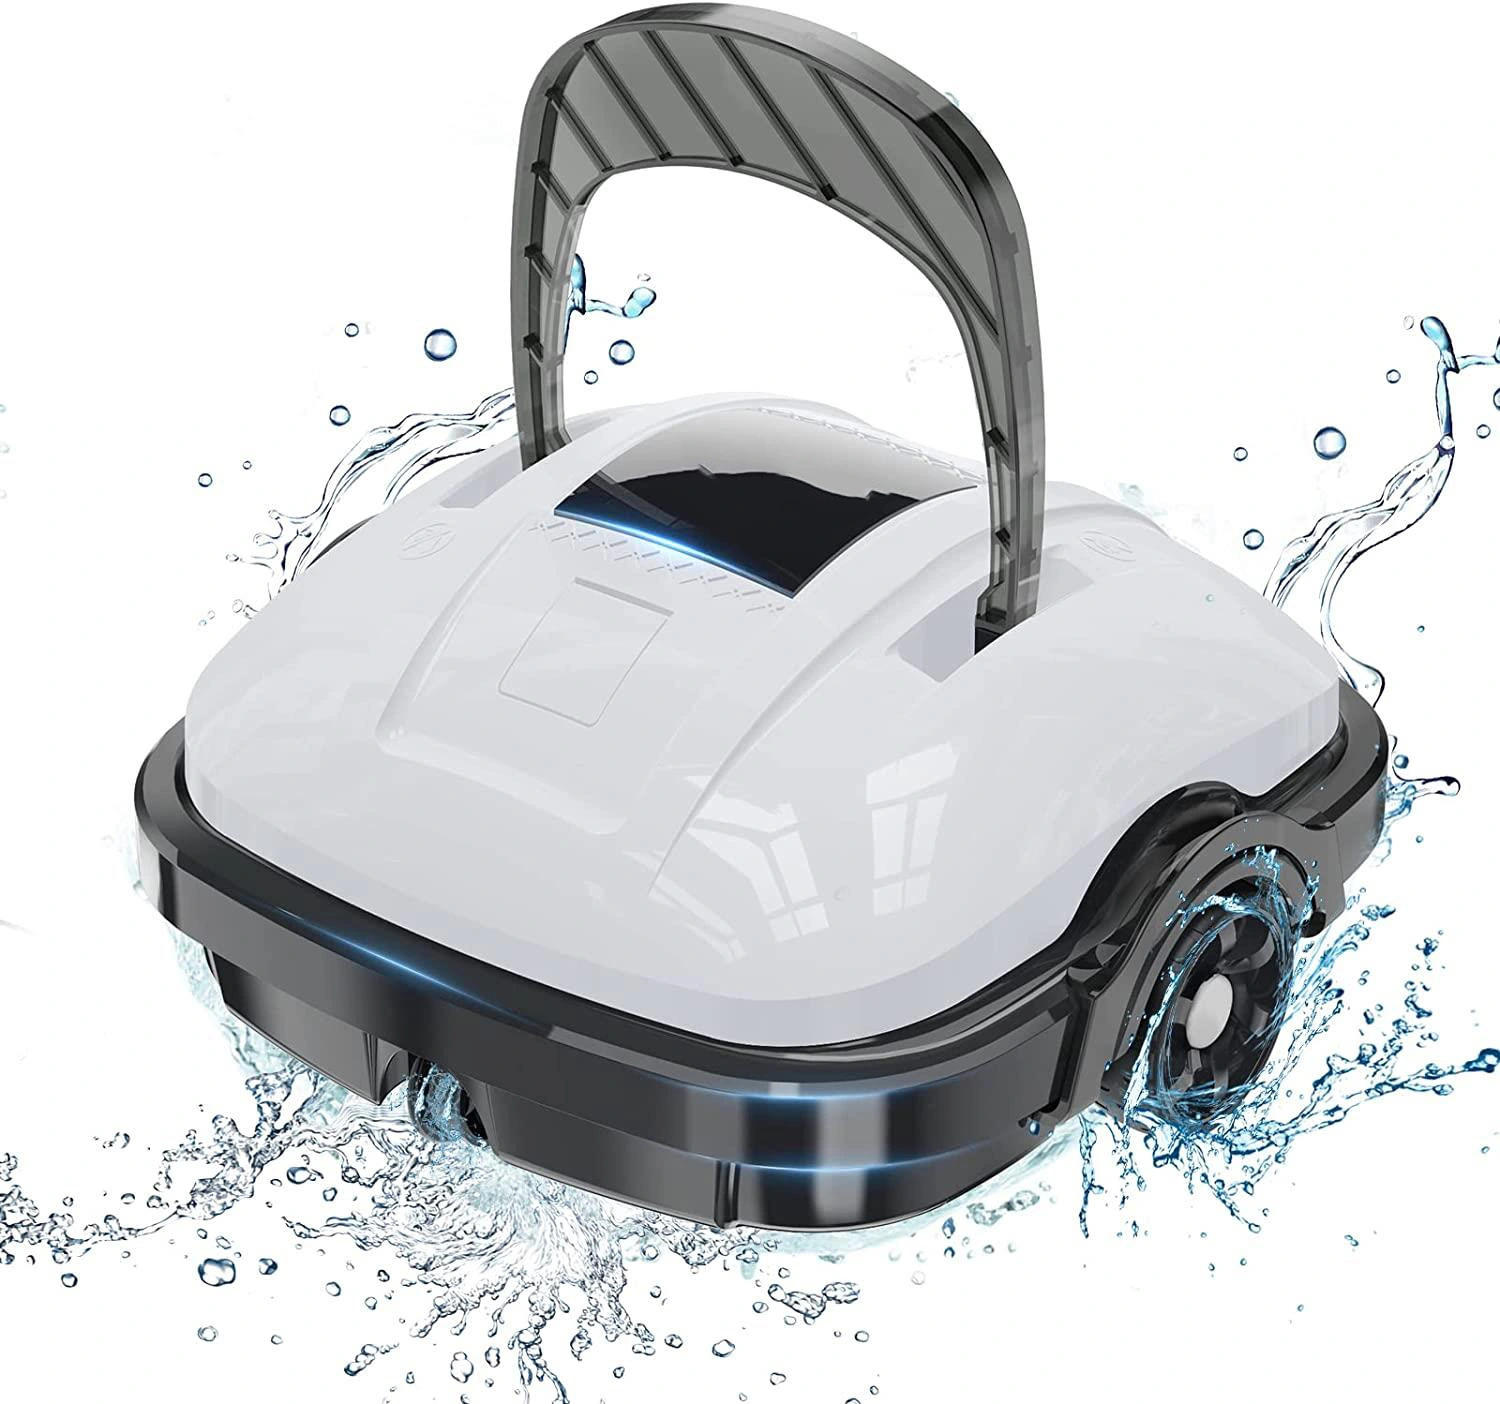 Cordless Robotic Pool Cleaner, Automatic Pool Vacuum, IPX8 Waterproof, Dual-Motor, 180μm Fine Filter, Ideal for Above Ground Pool and Flat Bottom In Ground Pool Up to 525 Sq.Ft,